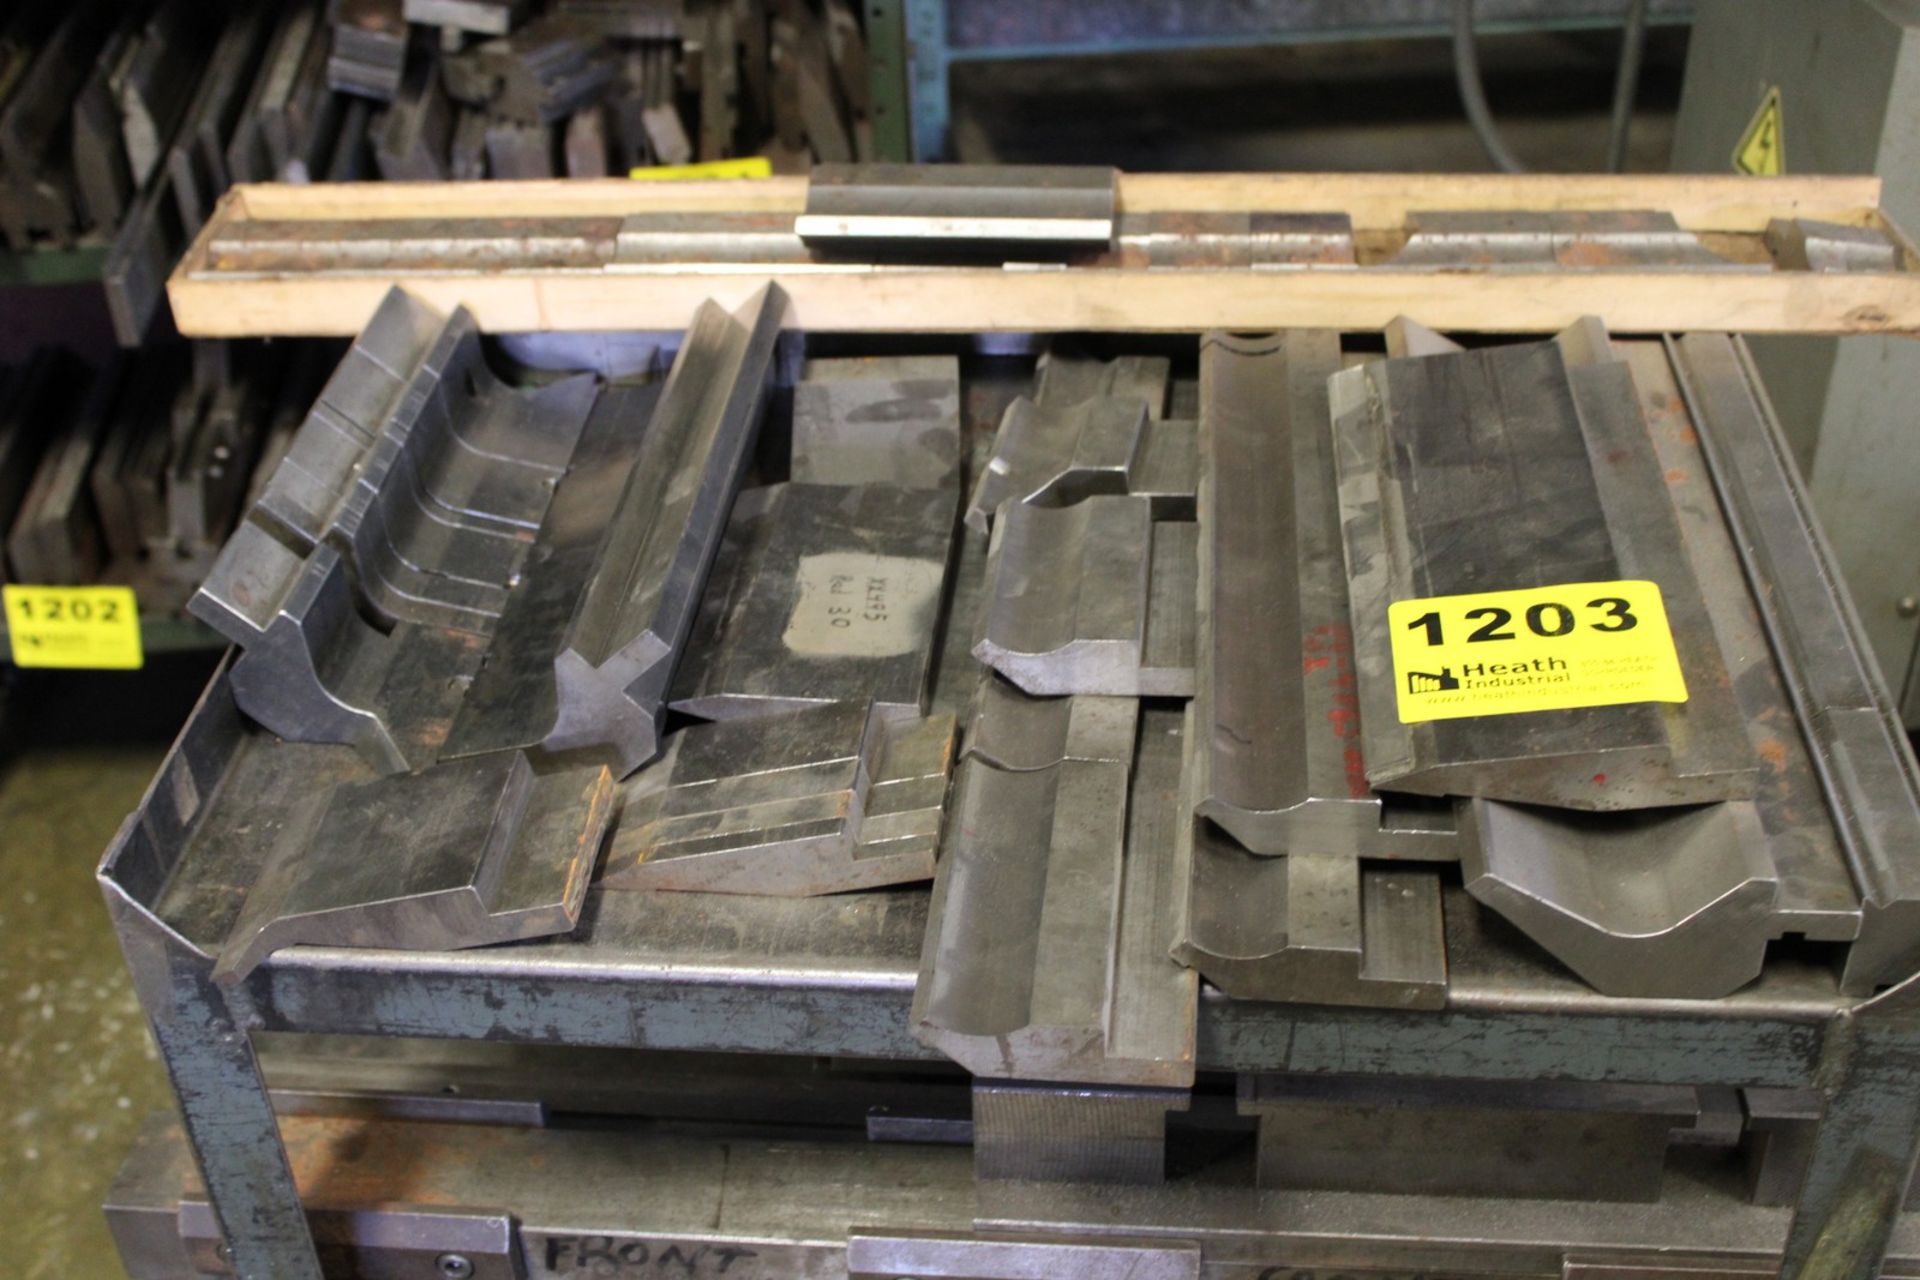 PORTABLE SHOP CART WITH ASSORTED PRESS BRAKE DIES - Image 3 of 3